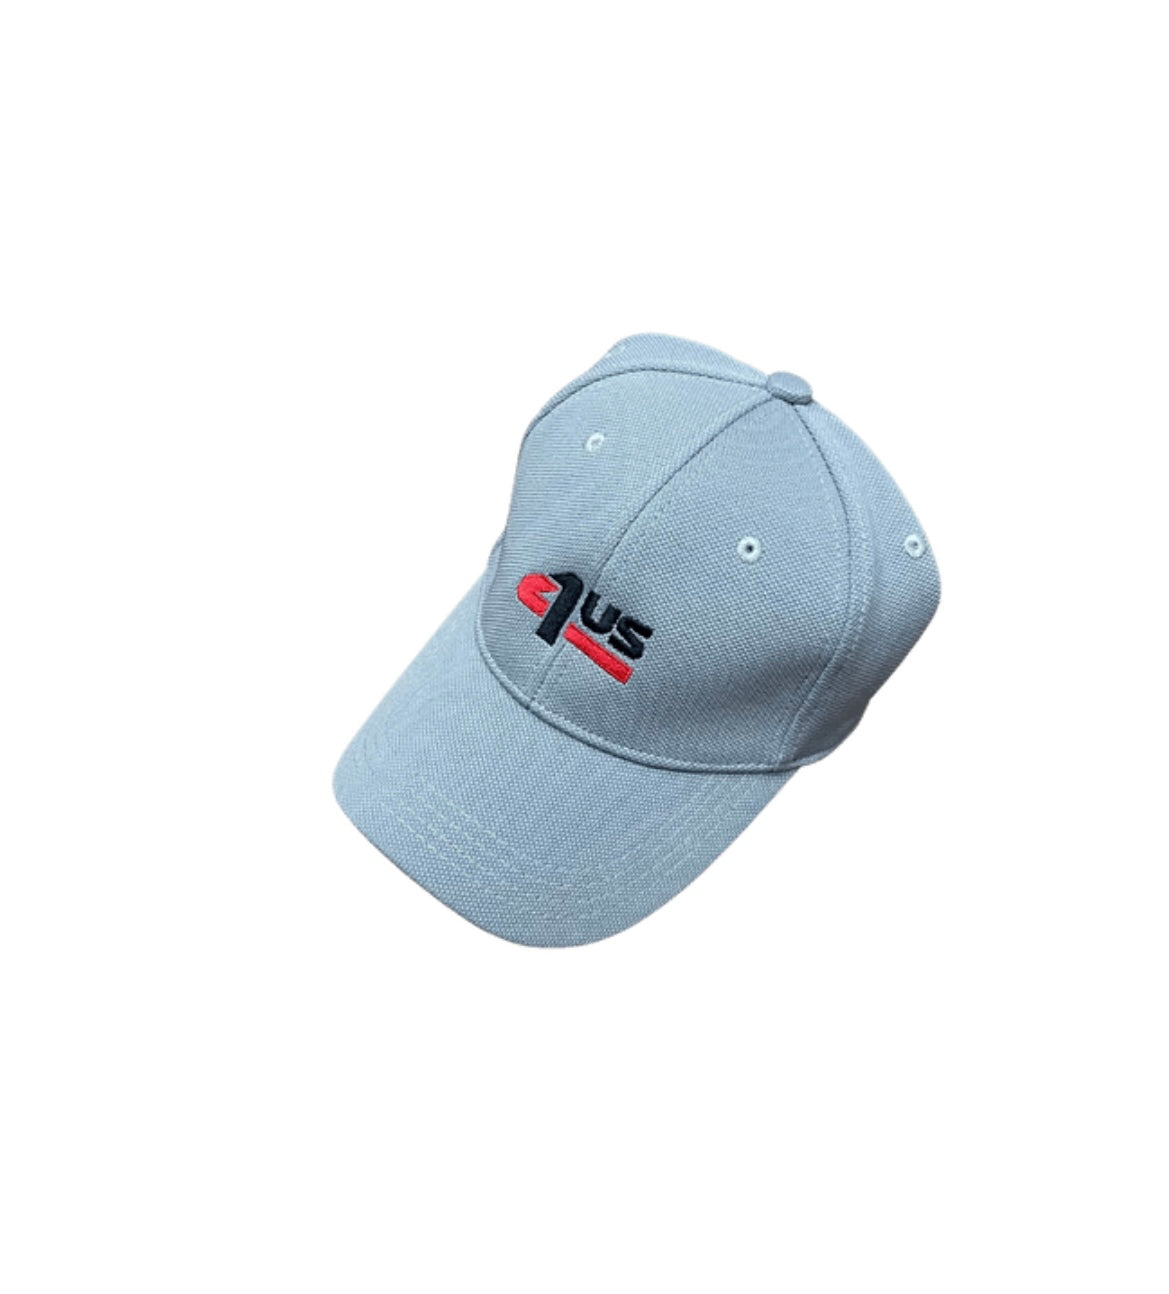 One4Us Logo Middle of Cap